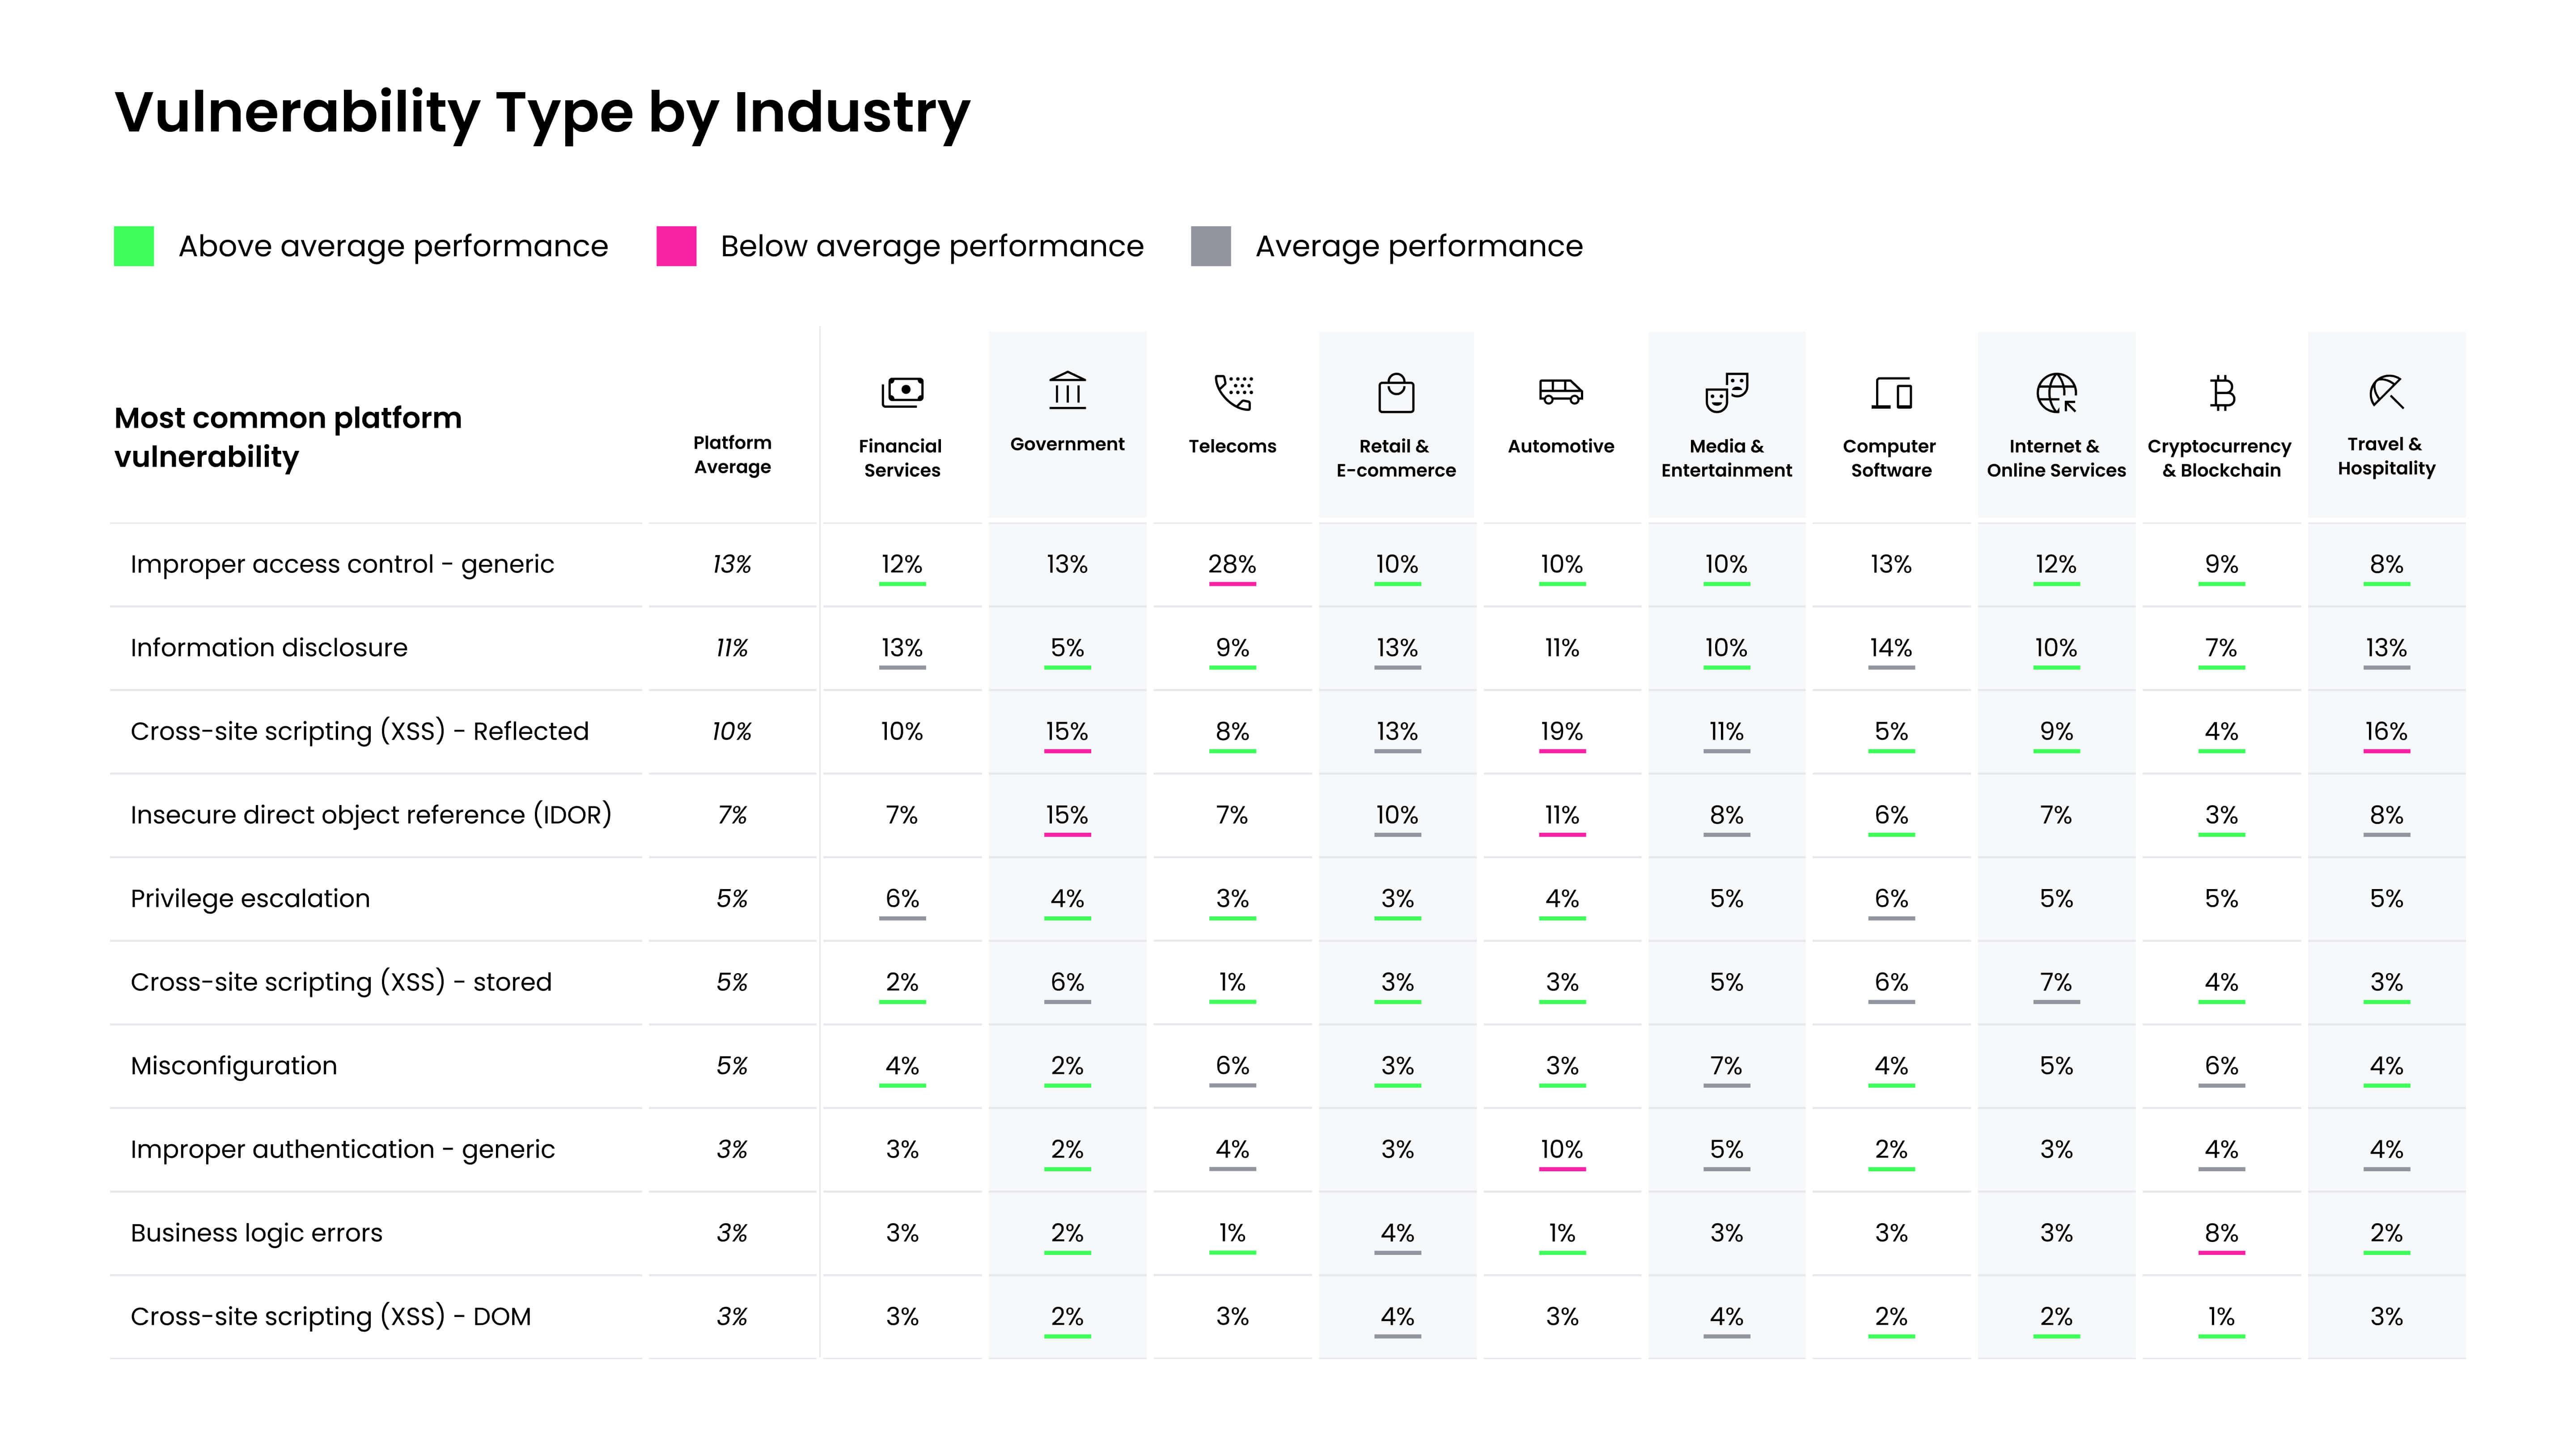 Chart showing vulnerability type by industry